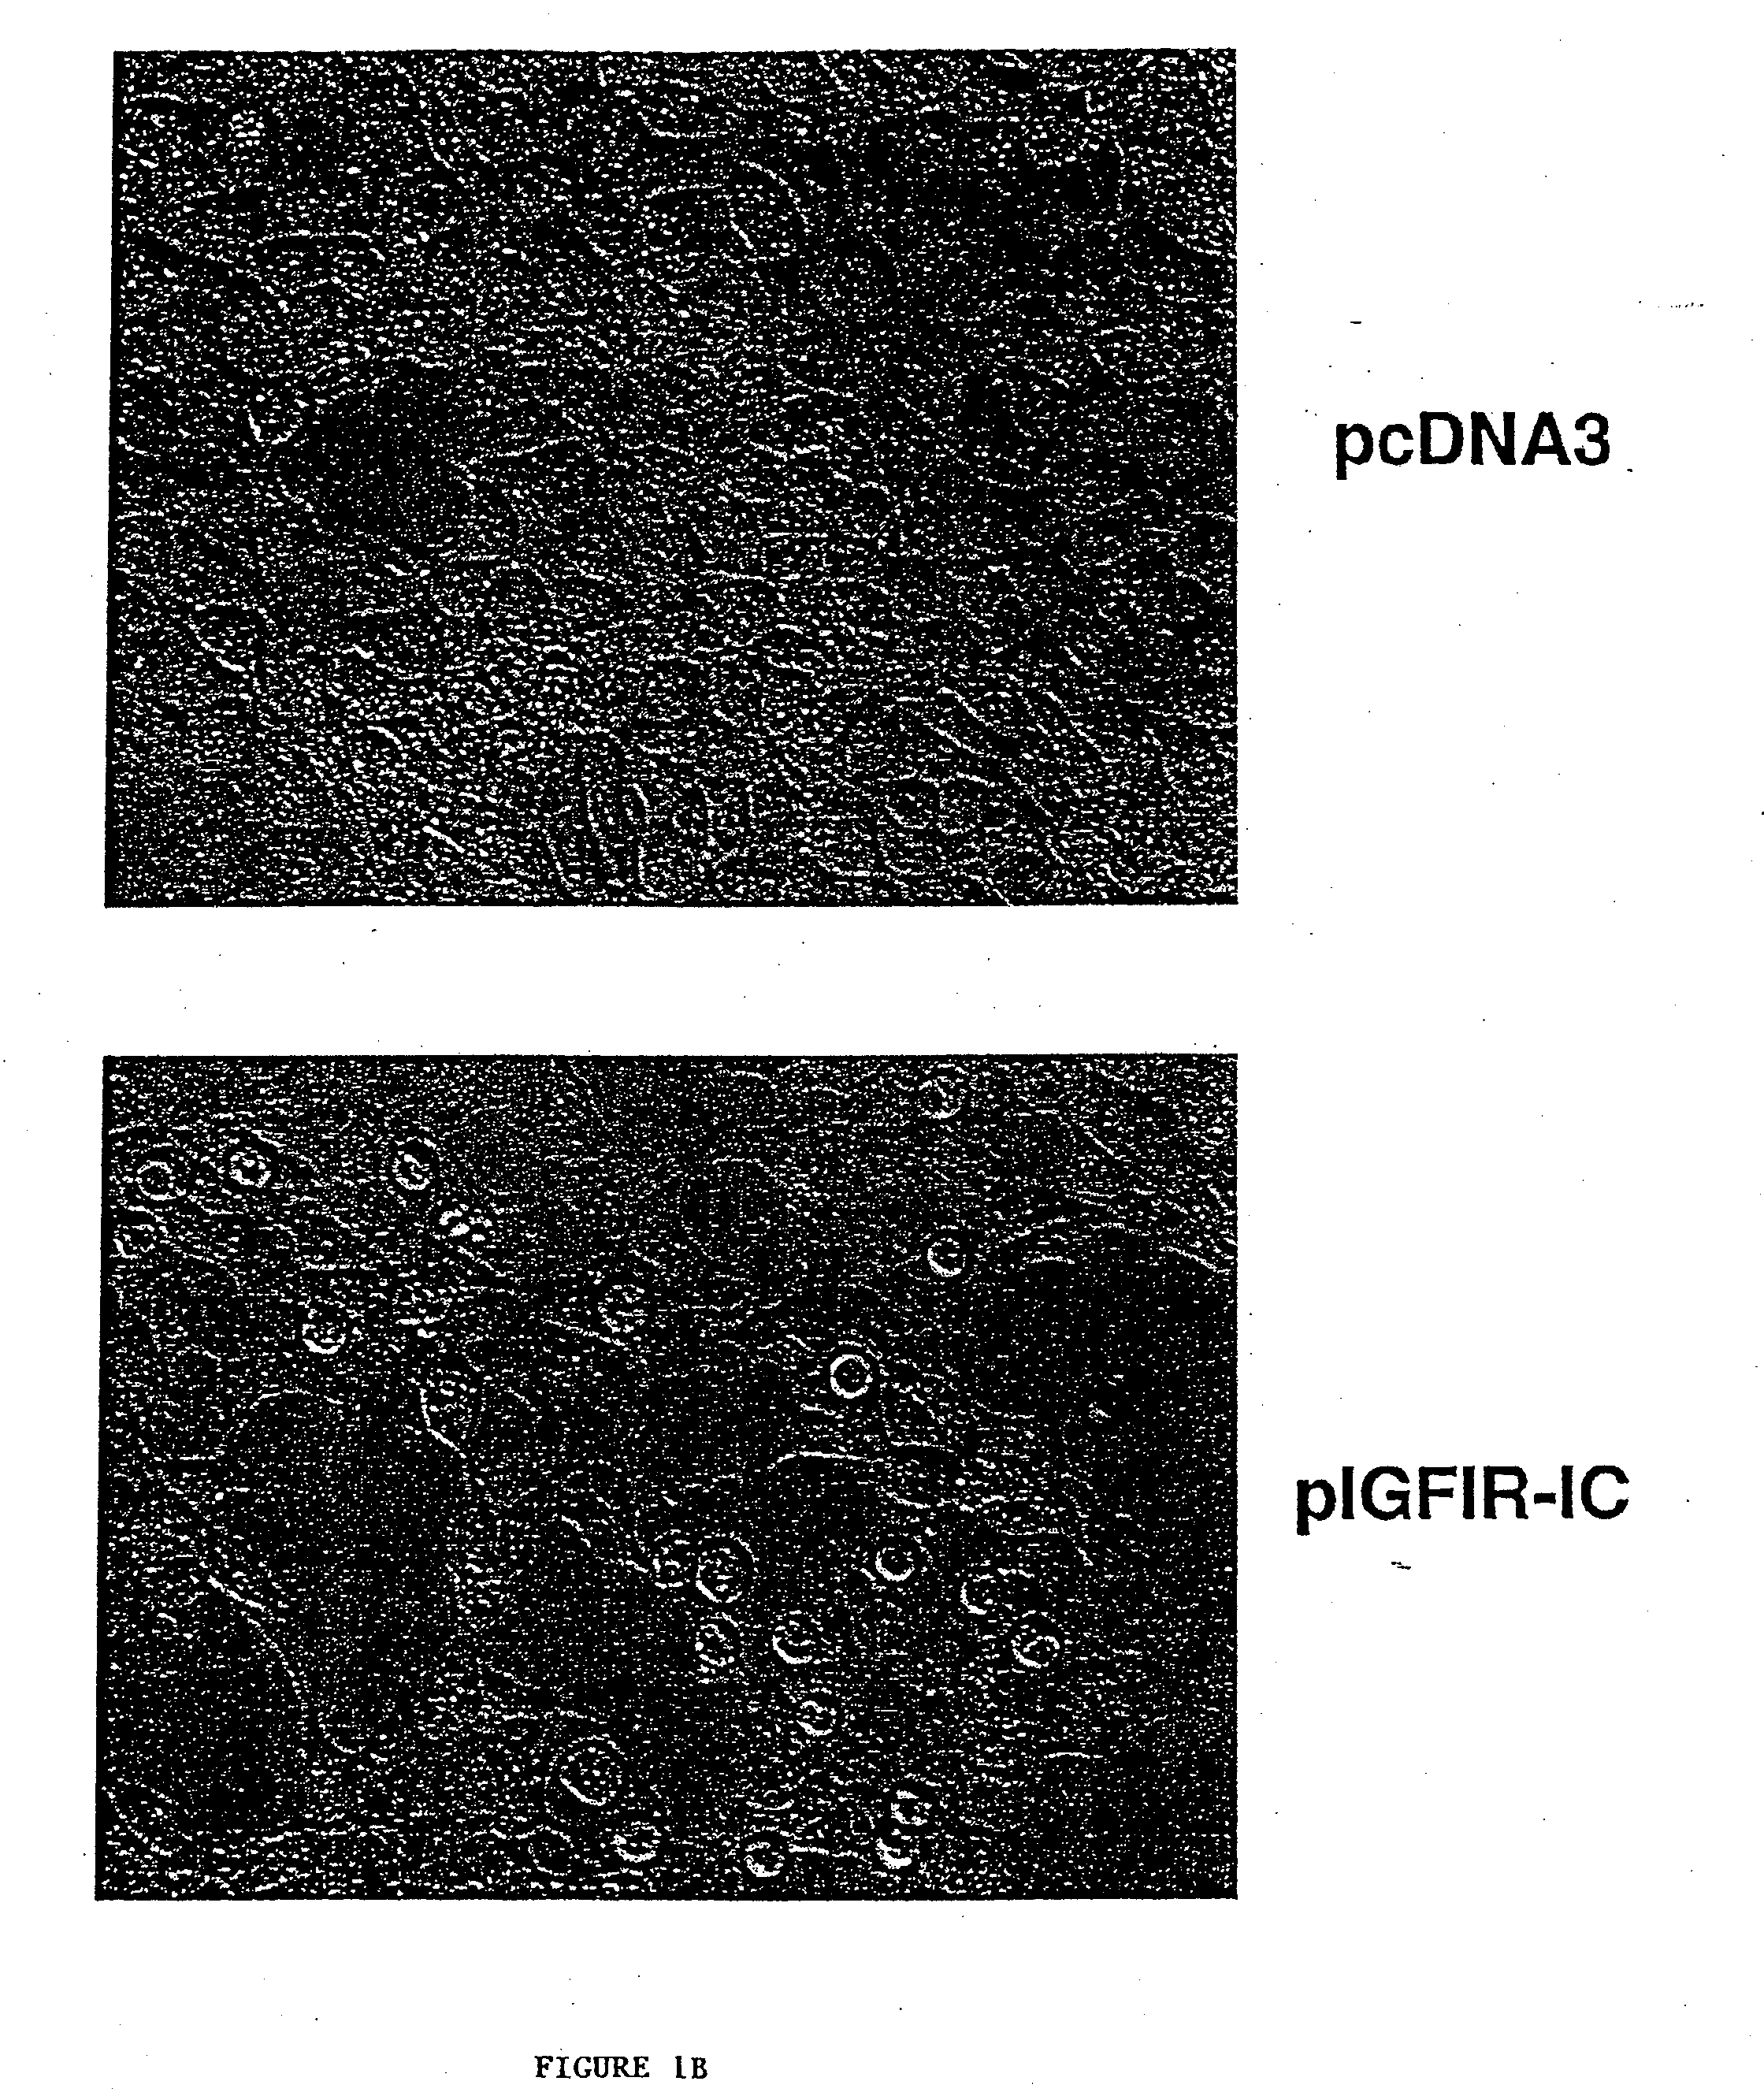 Nonapoptotic forms of cell death and methods of modulation